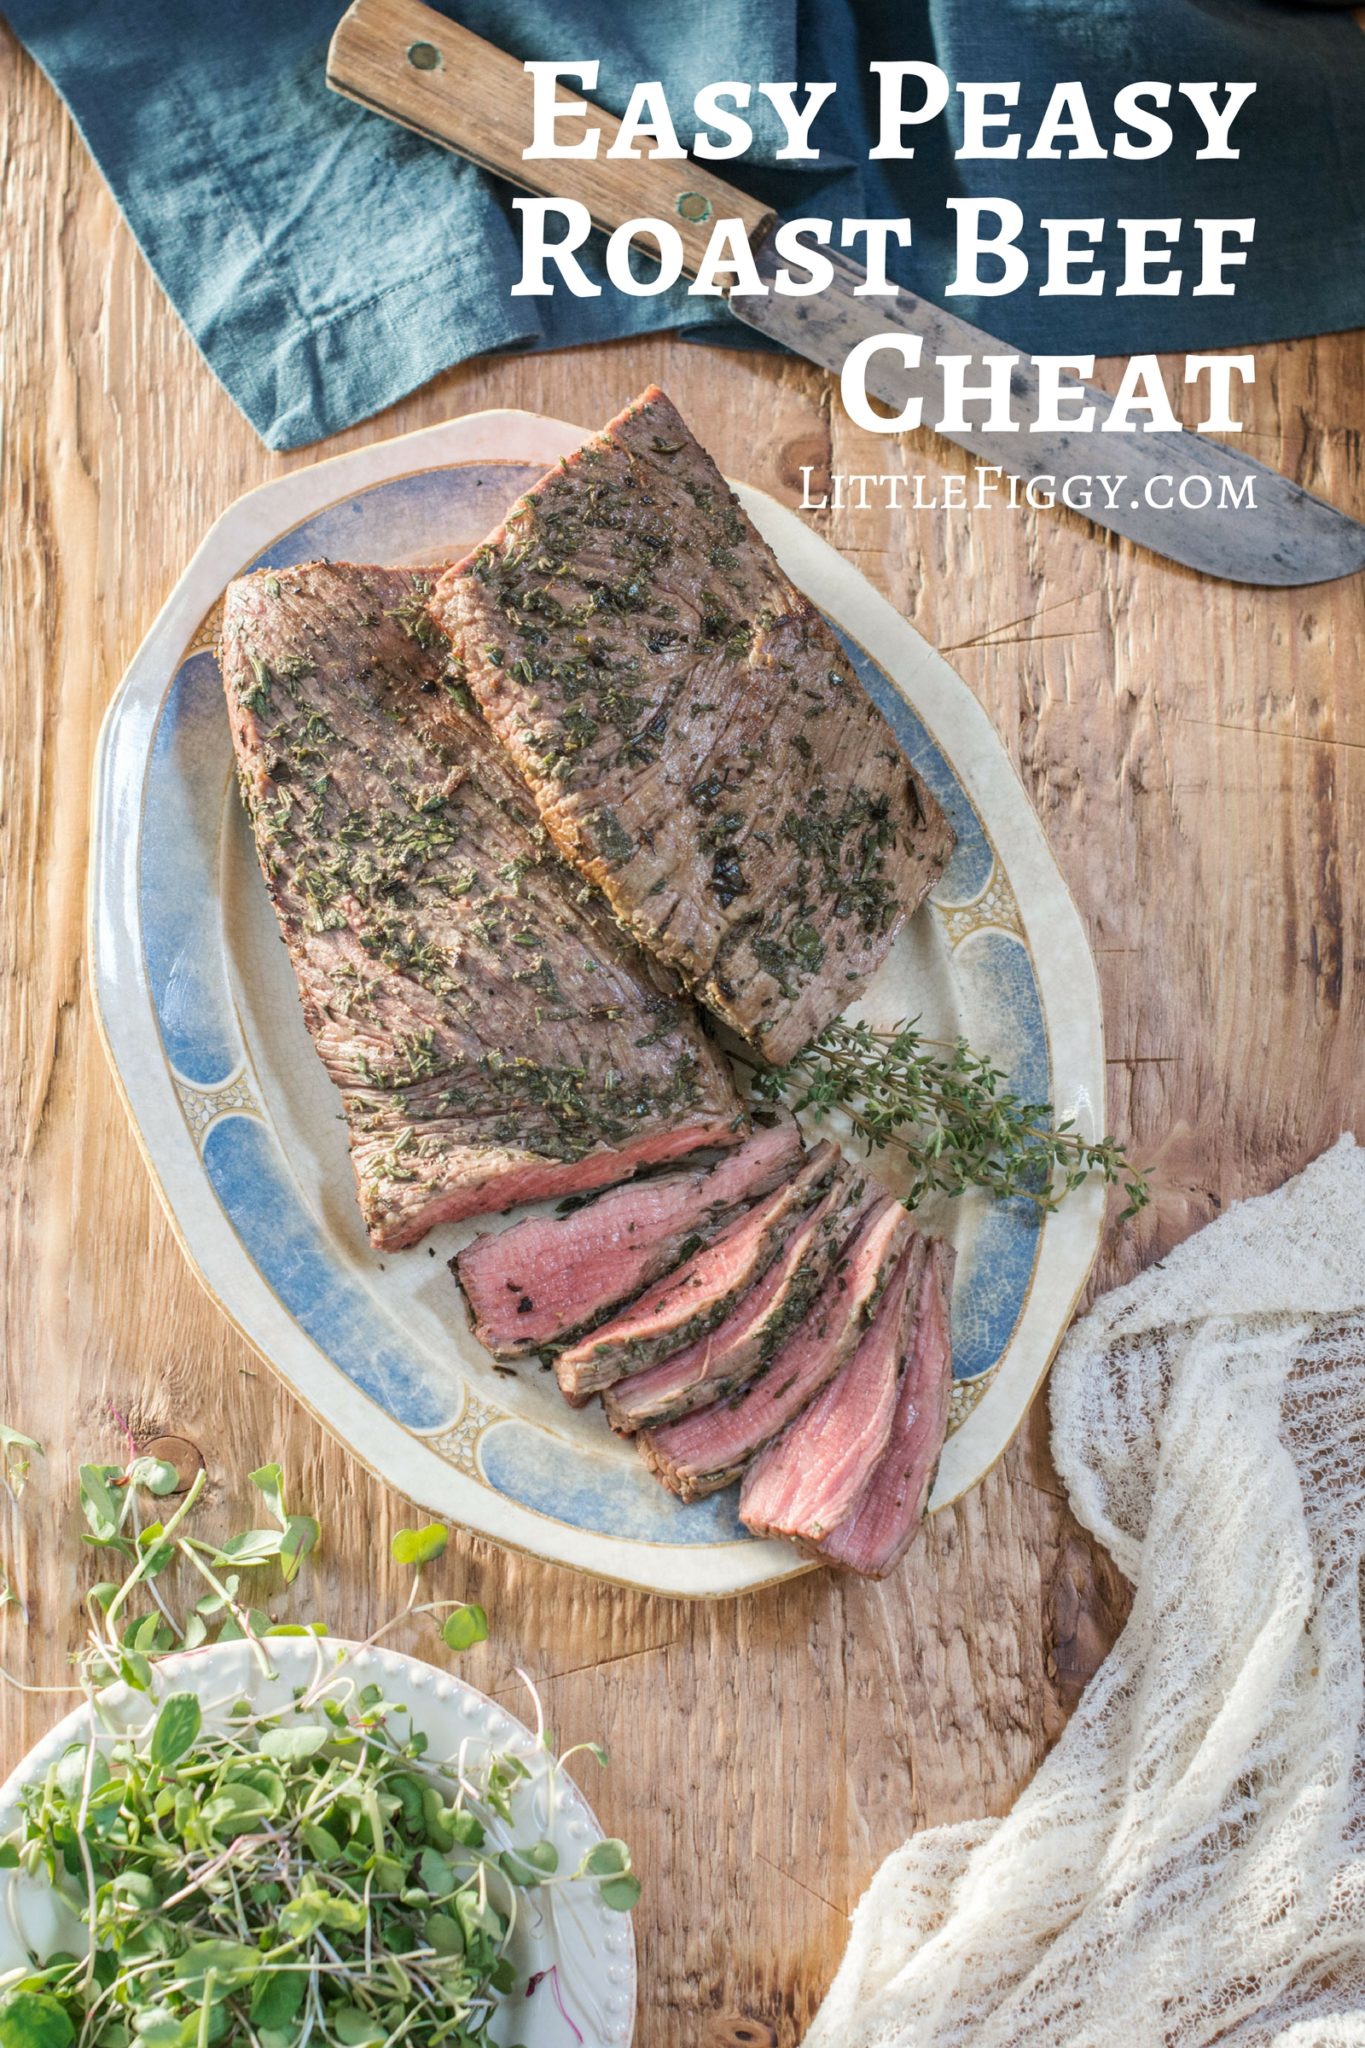 Easy Roast Beef Cheat, a quick kitchen hack that makes an amazingly tasty Roast Beef. Get the recipe at Little Figgy Food.